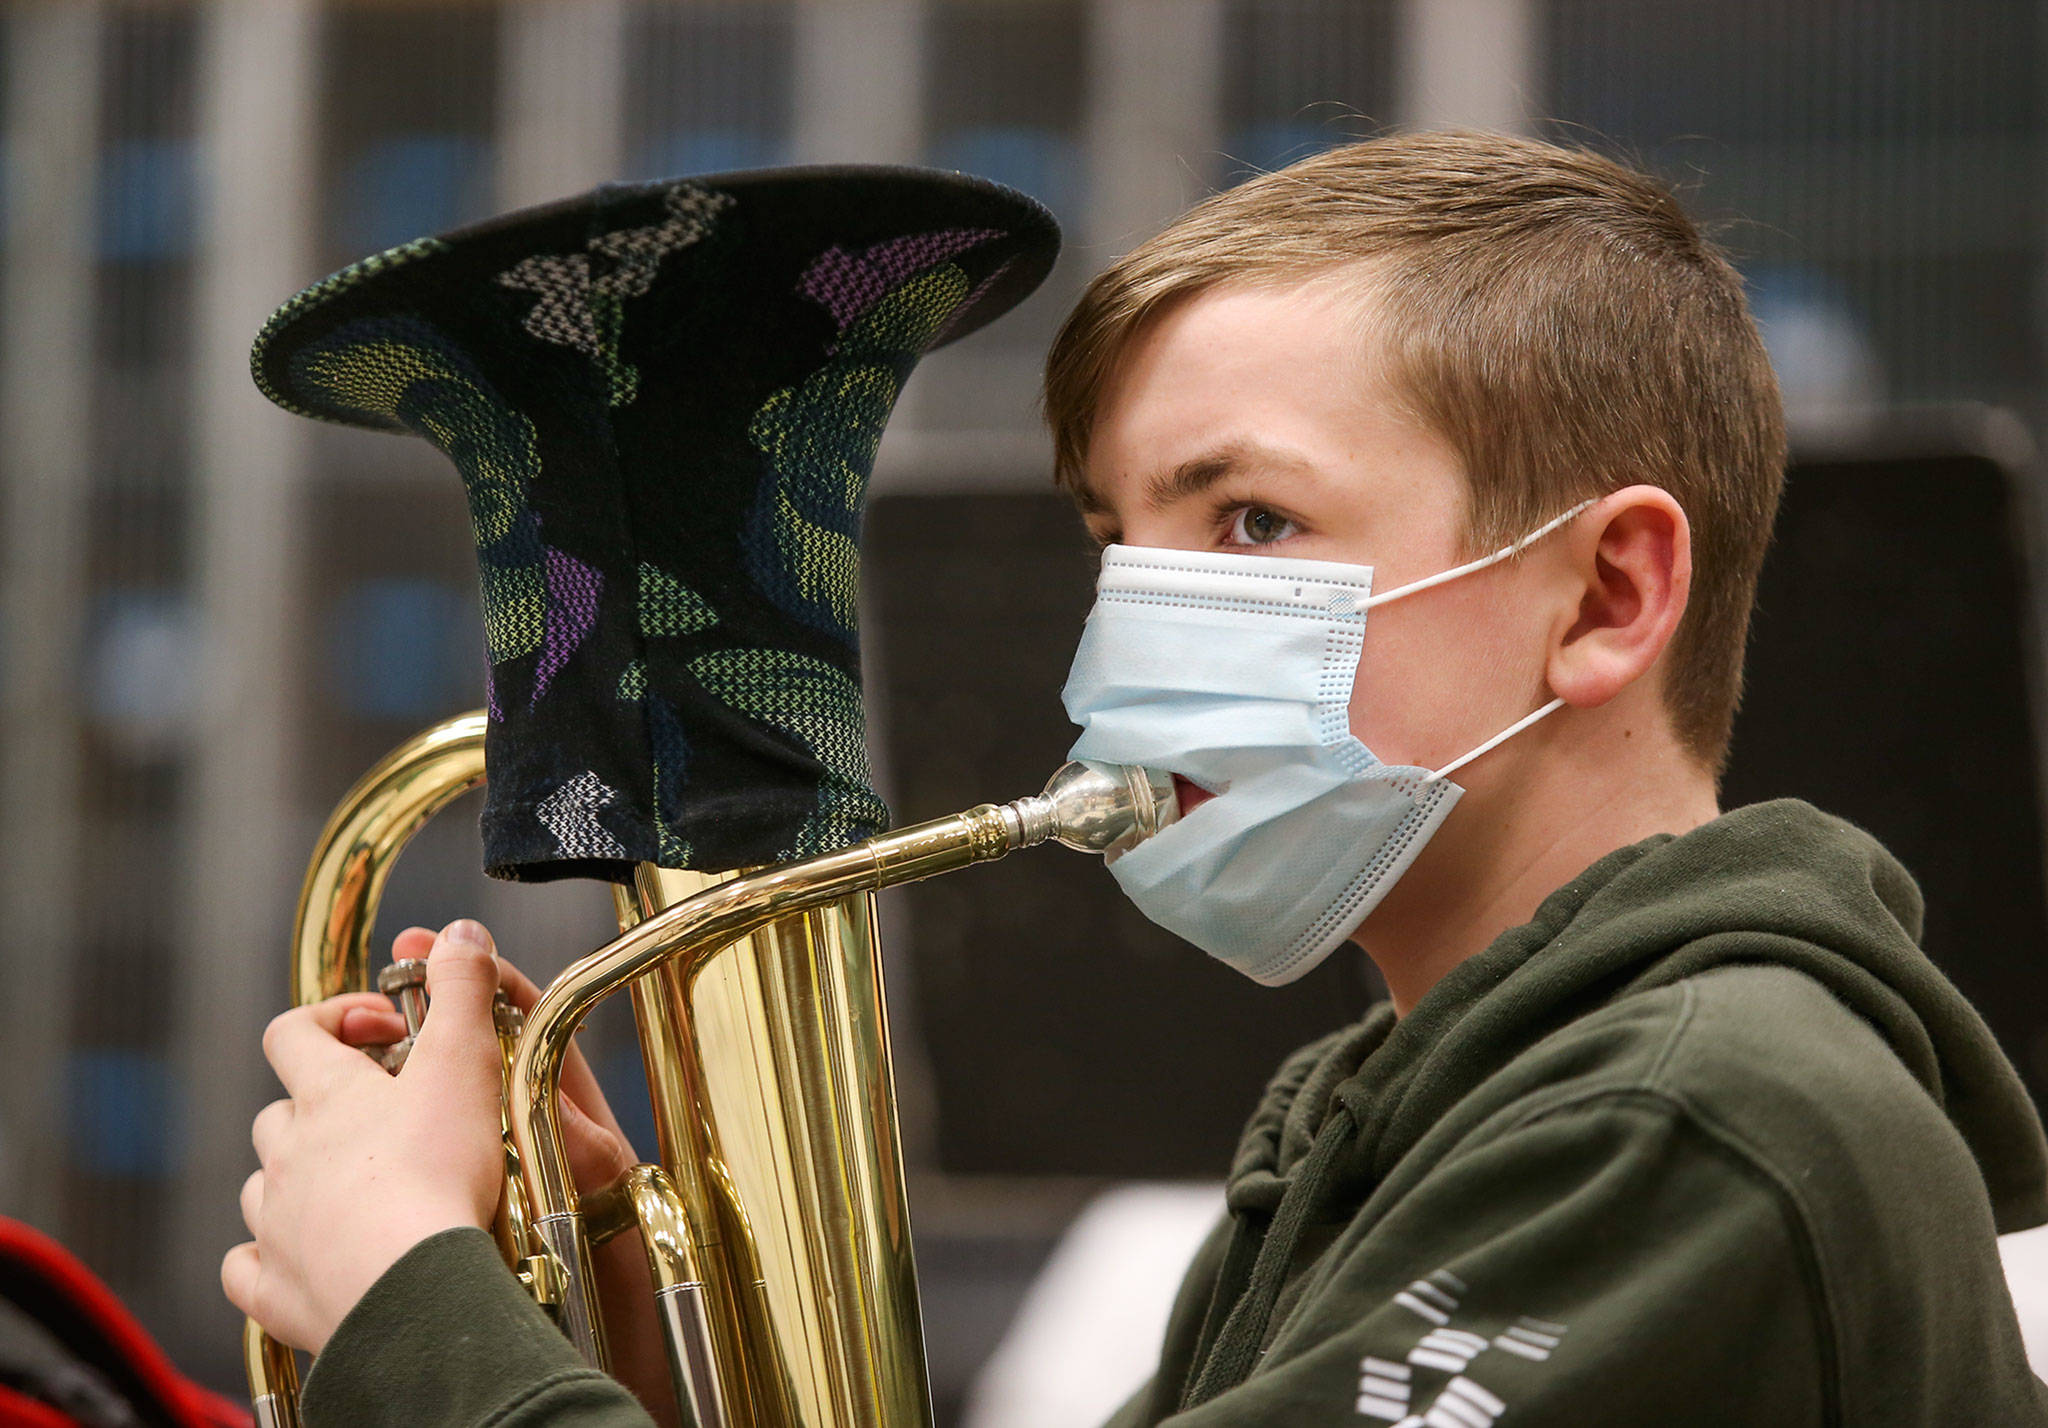 Shaun Metz wears a mask with a slit in it so he can play the baritone Thursday during Haller Middle School band practice in Arlington. (Andy Bronson / The Herald)